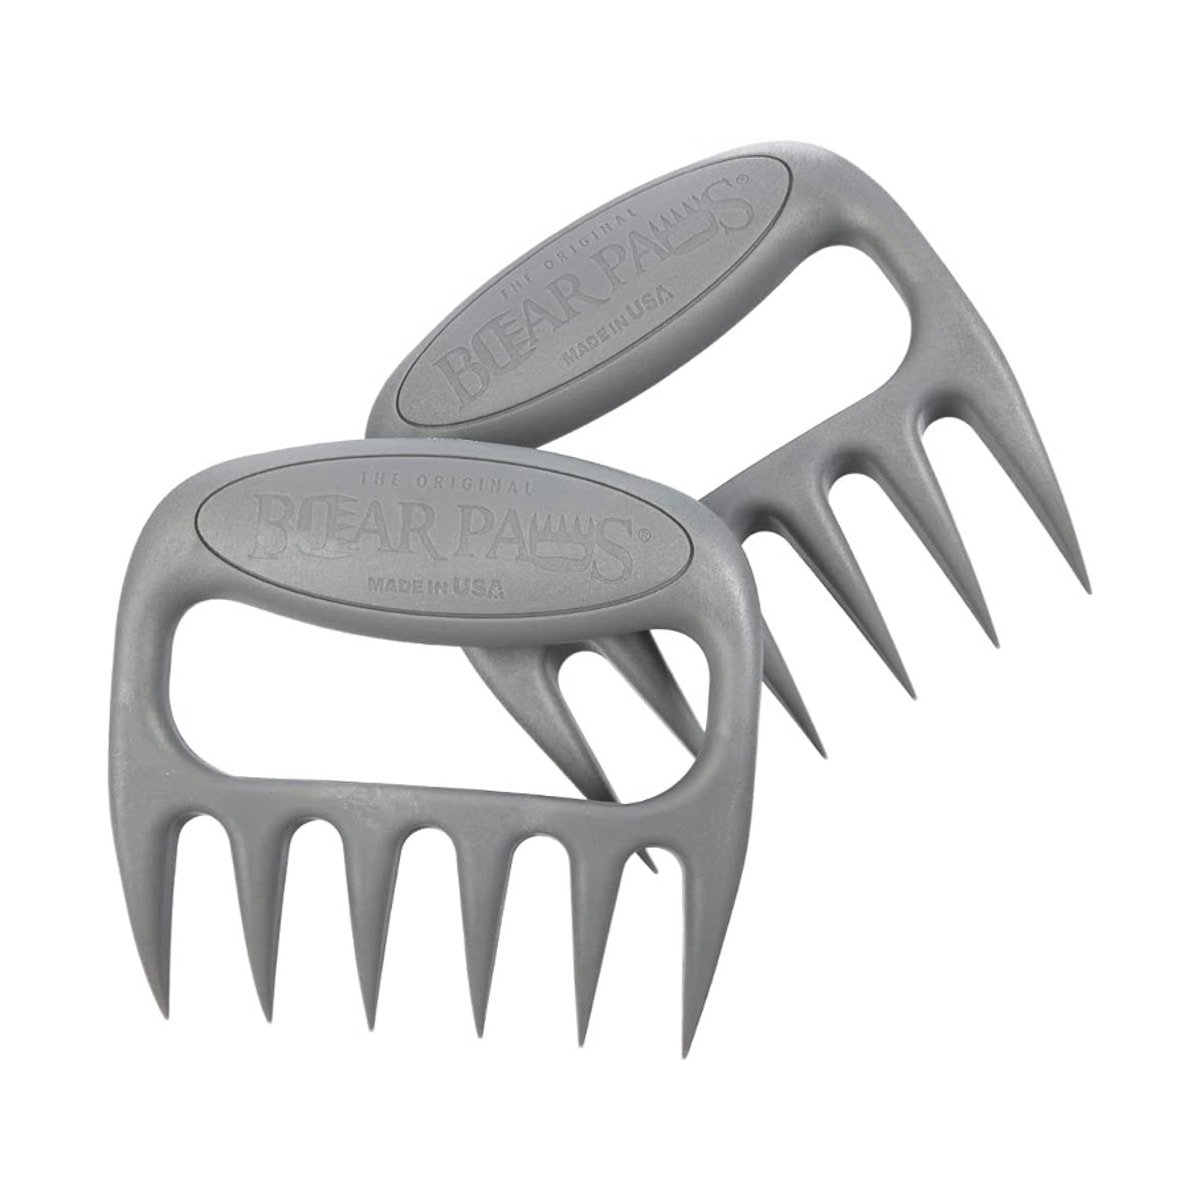 Two gray claws with sharp points and handles that can be used to shred meat.